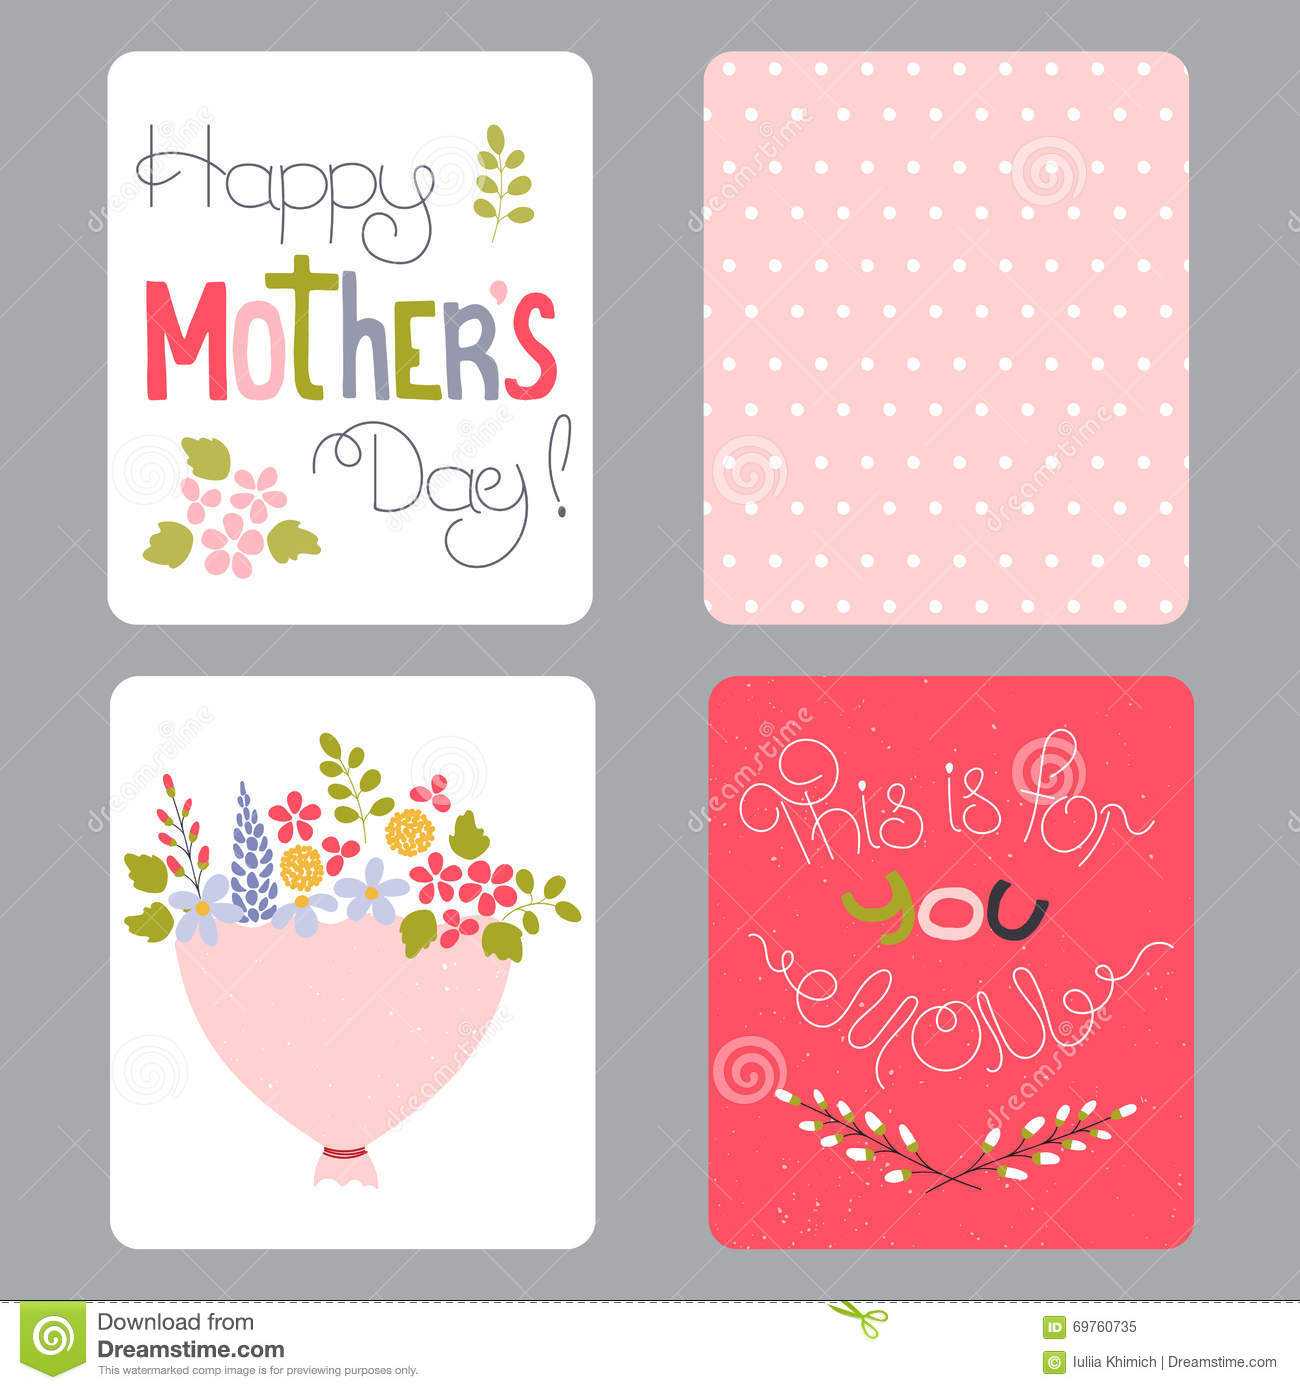 Mothers Day Set Of Cards Stock Vector. Illustration Of Party With Mothers Day Card Templates